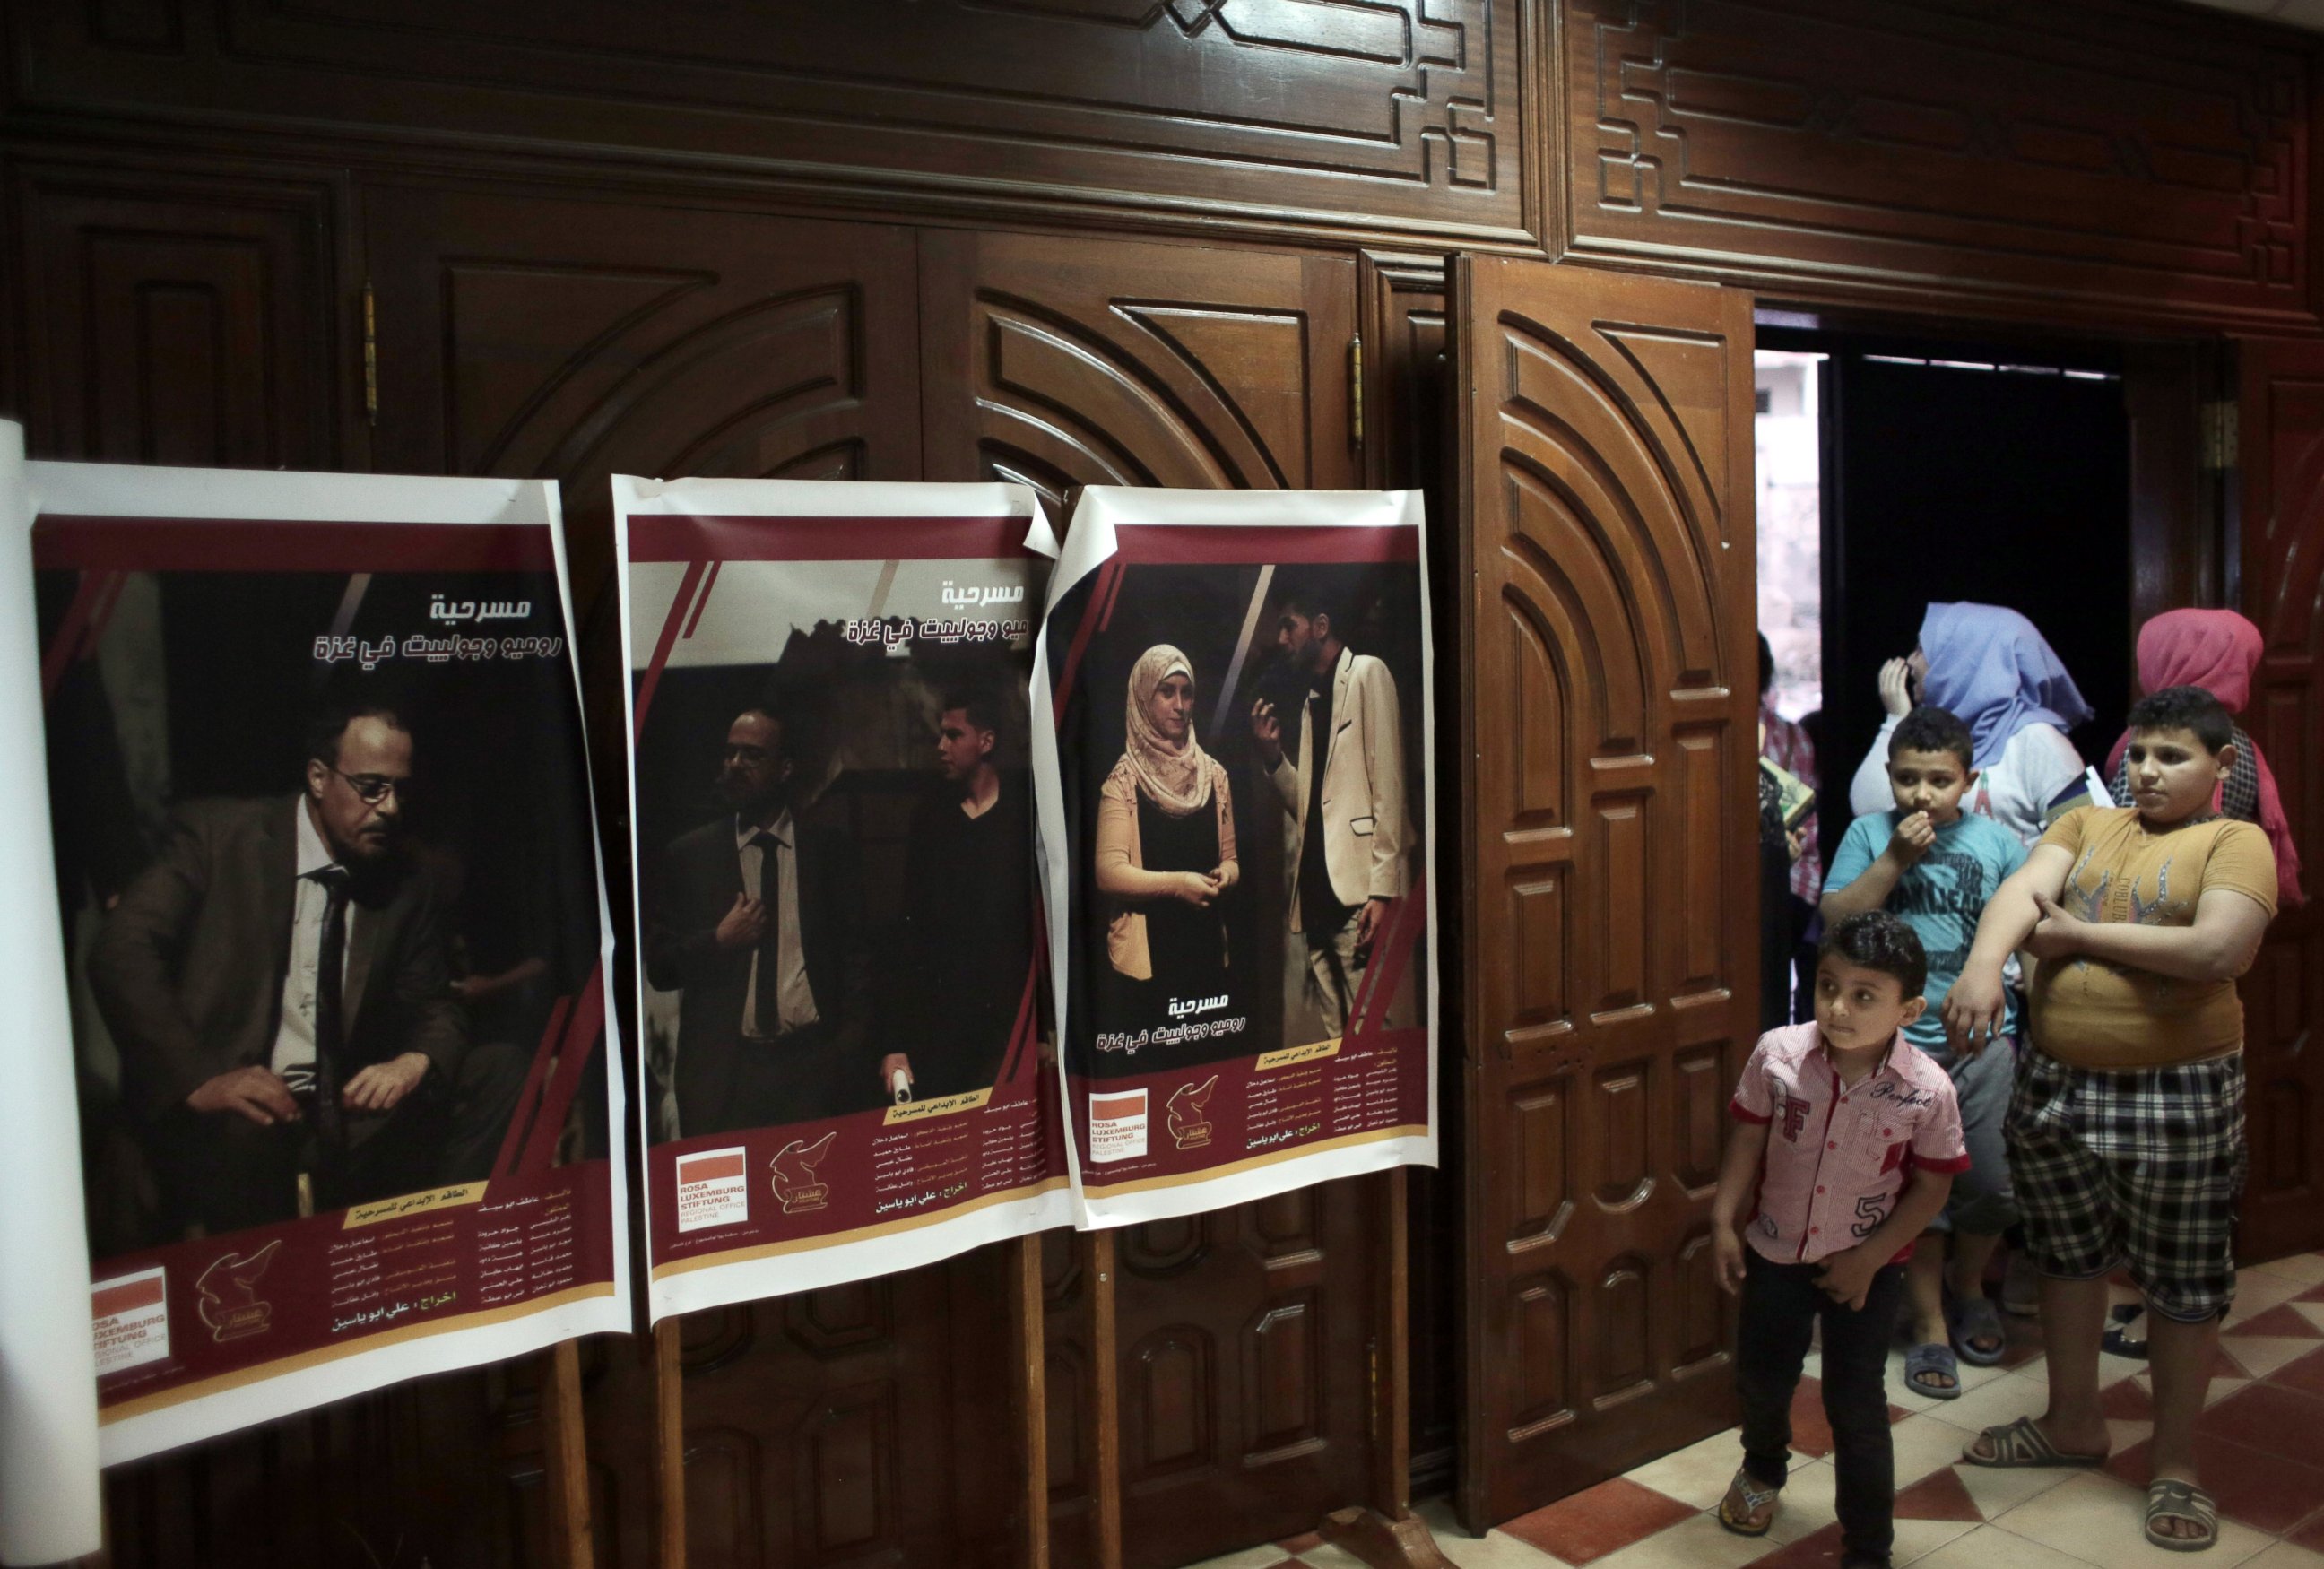 PHOTO: A Palestinian family looks at posters of the Gaza version of Shakespeare?s "Romeo and Juliet" at a cultural center in Gaza City, April 28, 2016.